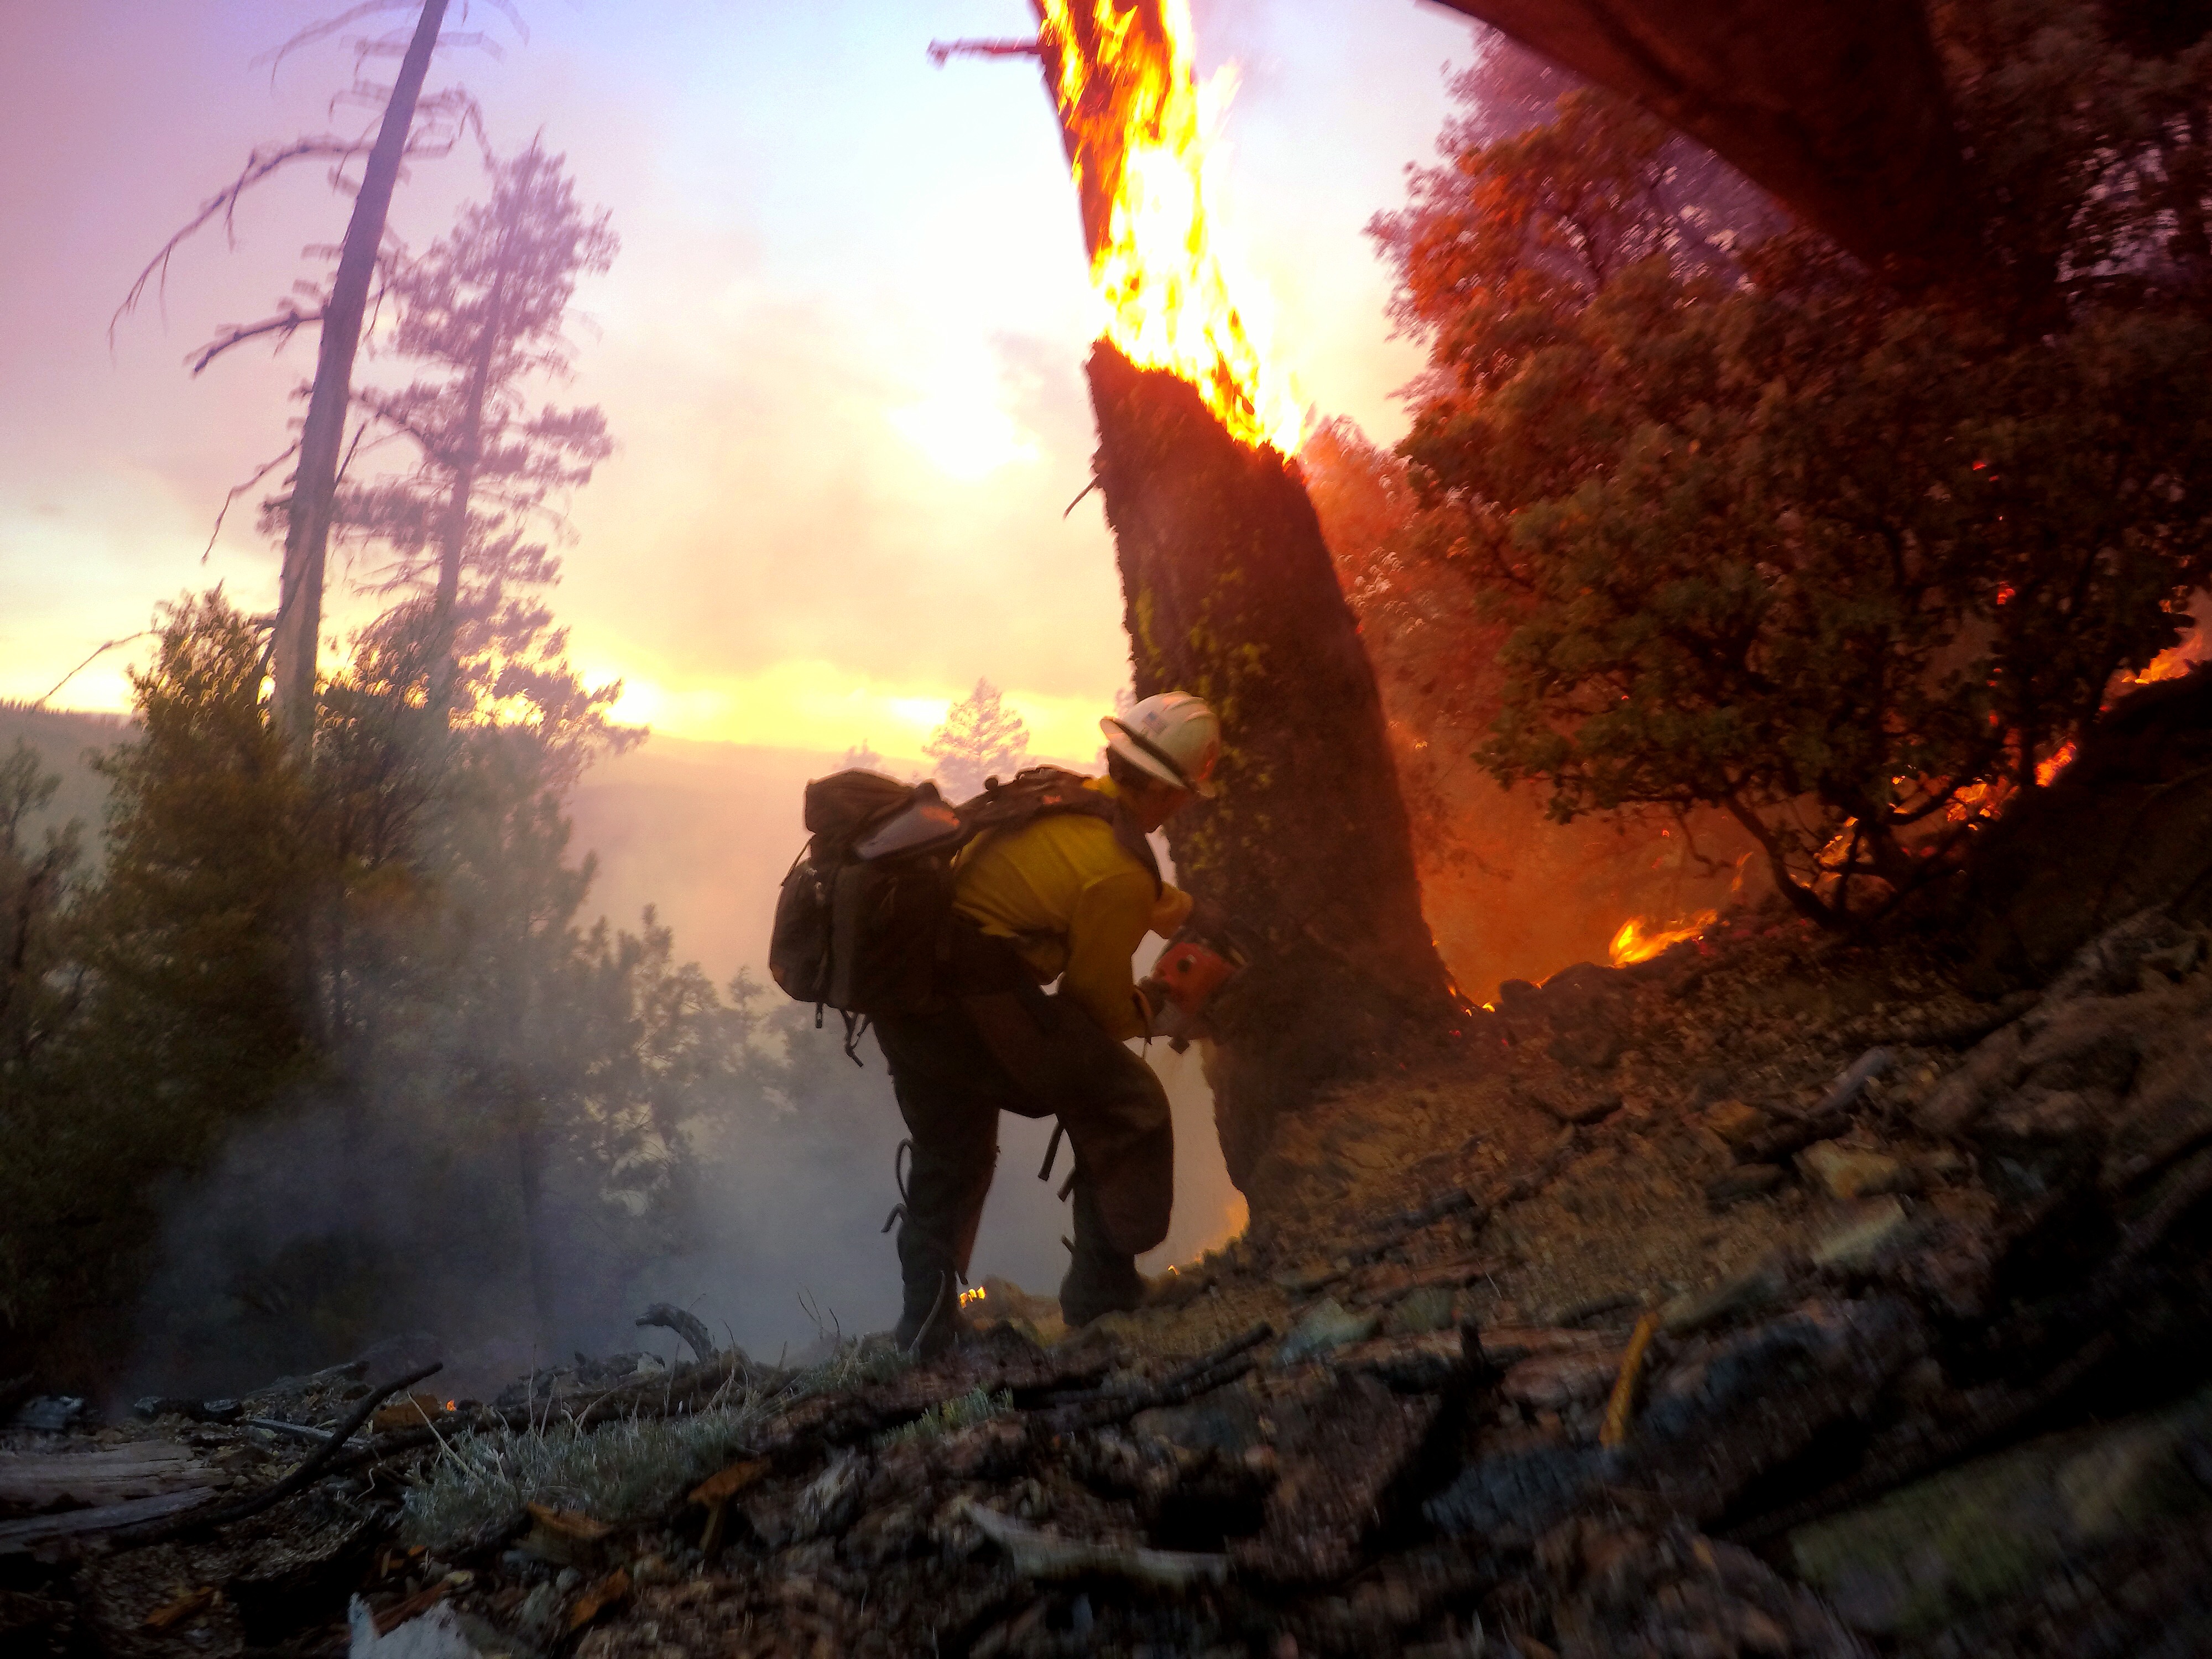 Wildland firefighter cutting down tree that is one fire. Photo taken by ExpertVoice Expert Gregg Boydston